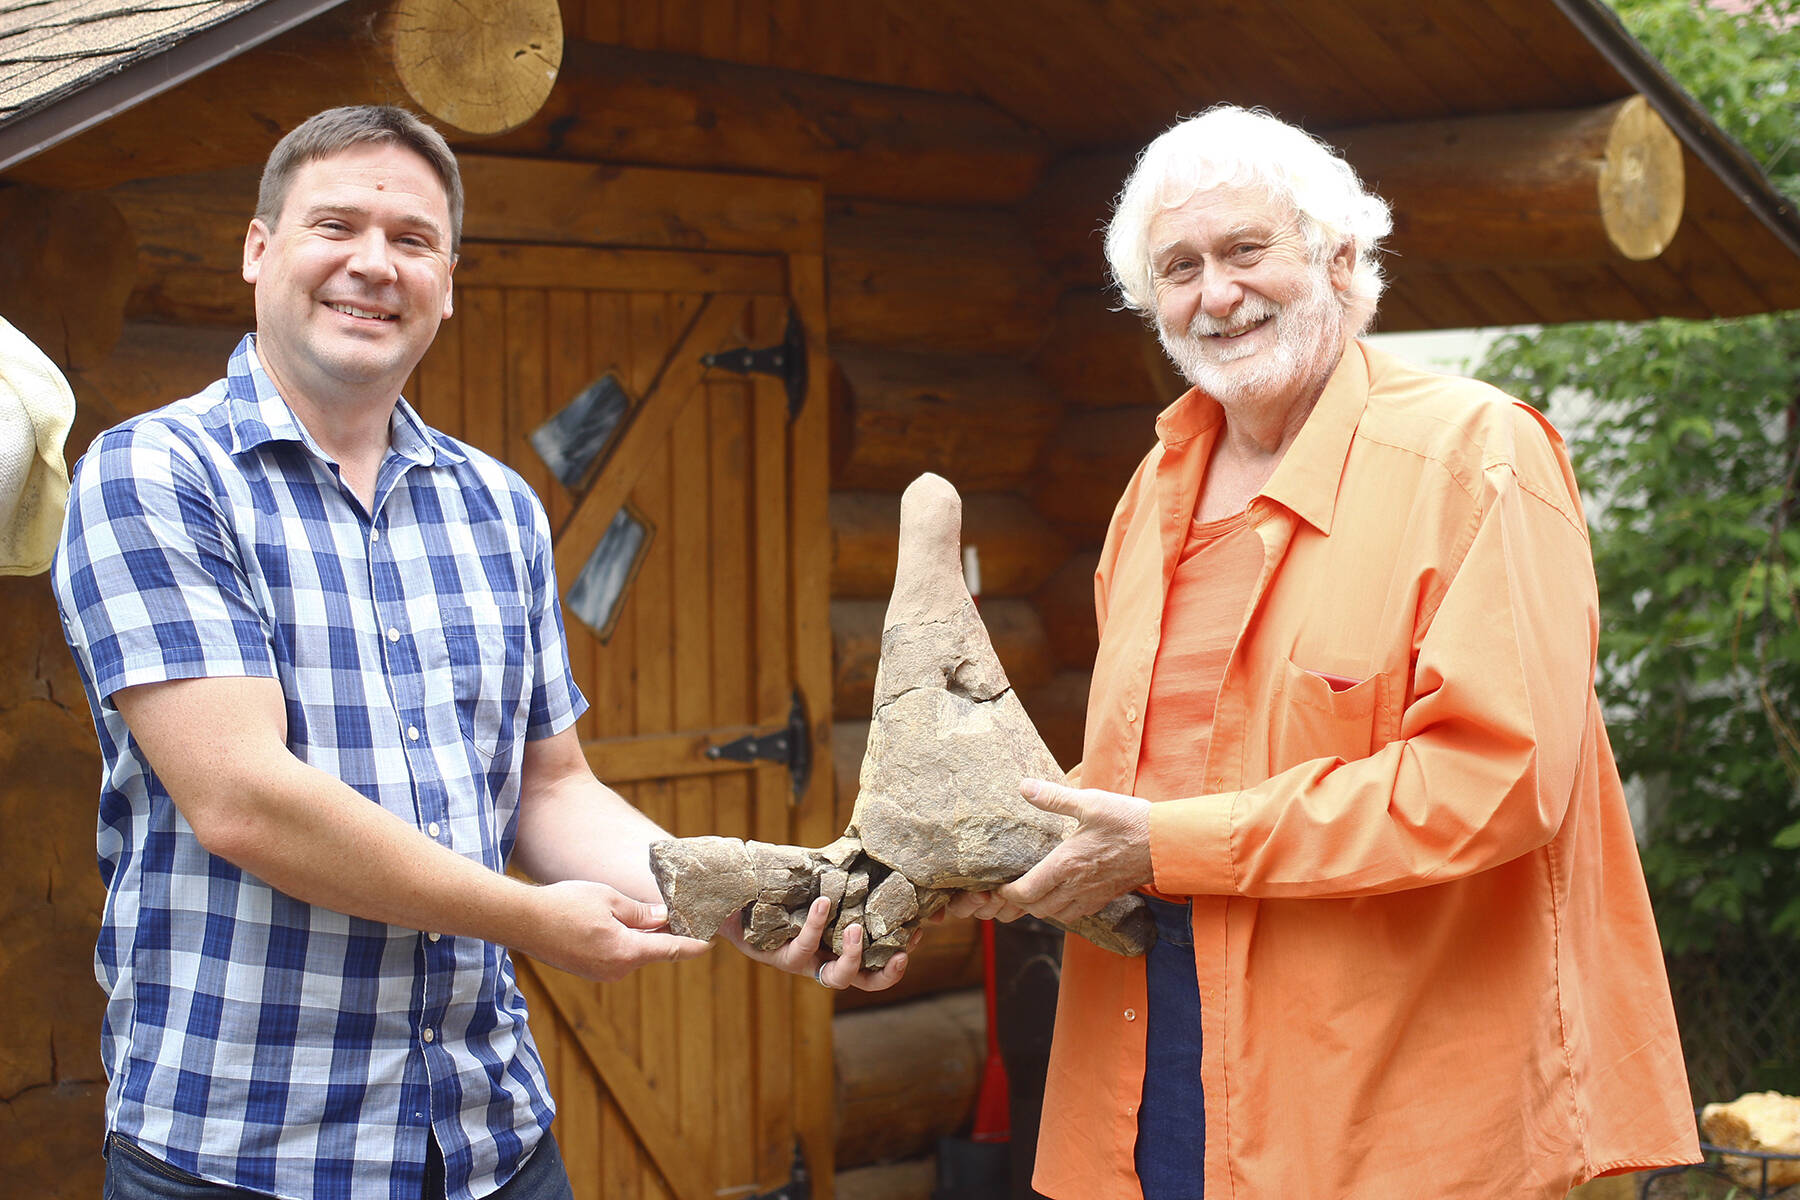 Dr. Caleb Brown, left and Garry McCue hold the piece of Triceratops horn being donated to the Royal Tyrrell Museum. Note: Image was altered to remove location-identifying information. (Photos by Emily Jaycox/Ponoka News)